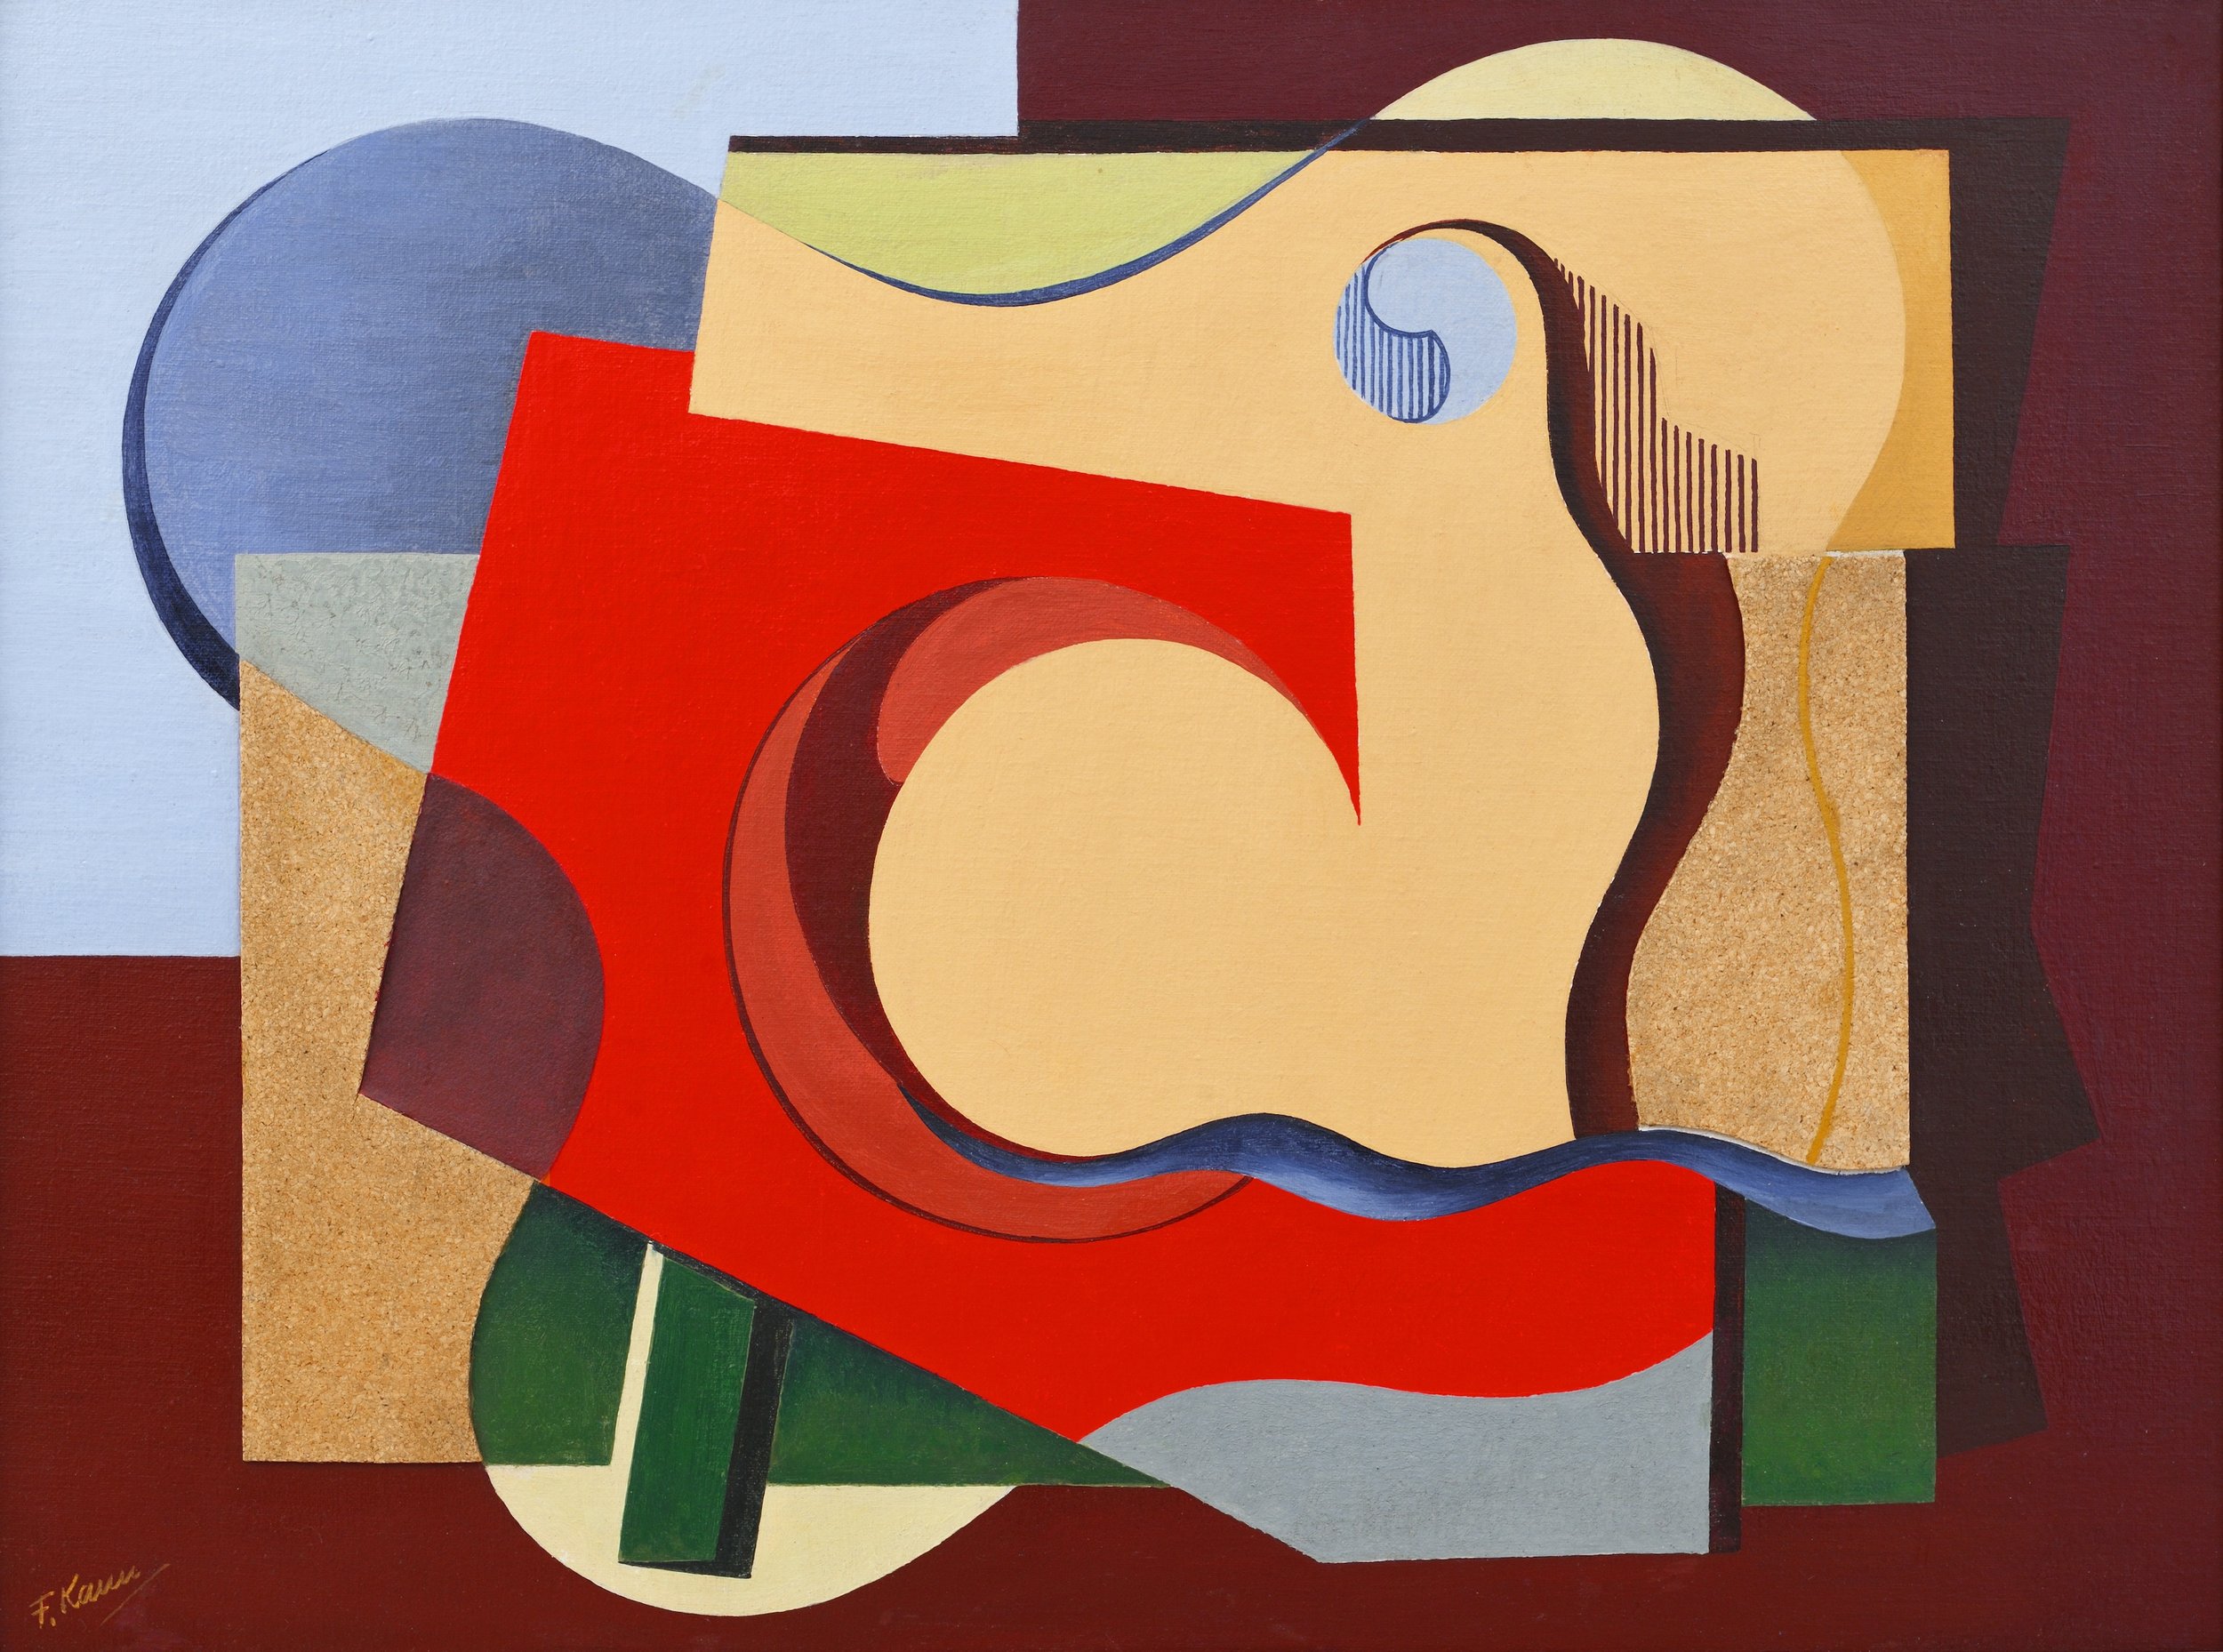 Geometric abstract painting of different colored flat planes and cork relief in primarily yellow, red, blue, and brown